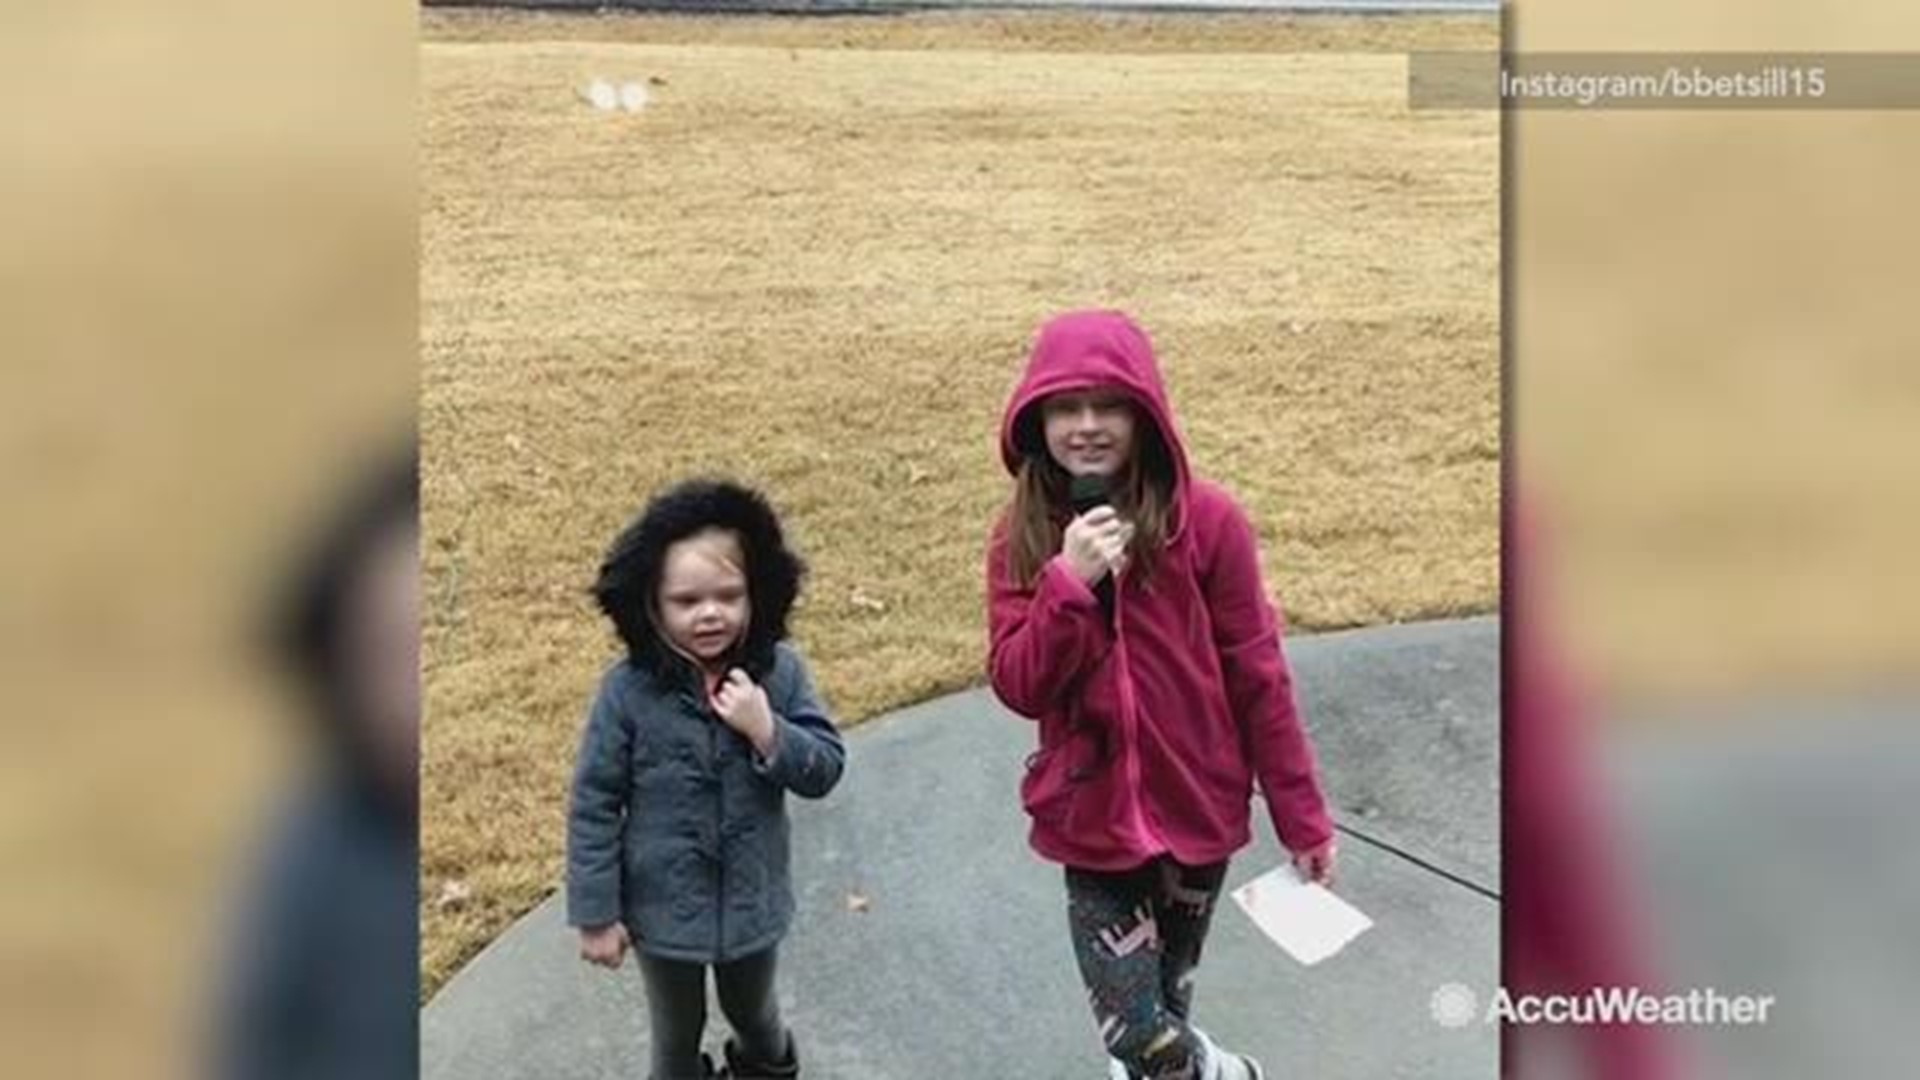 Before Greenville, South Carolina was hit with the winter storm on December 8th and 9th, two young meteorologists update everyone on the weather situation.